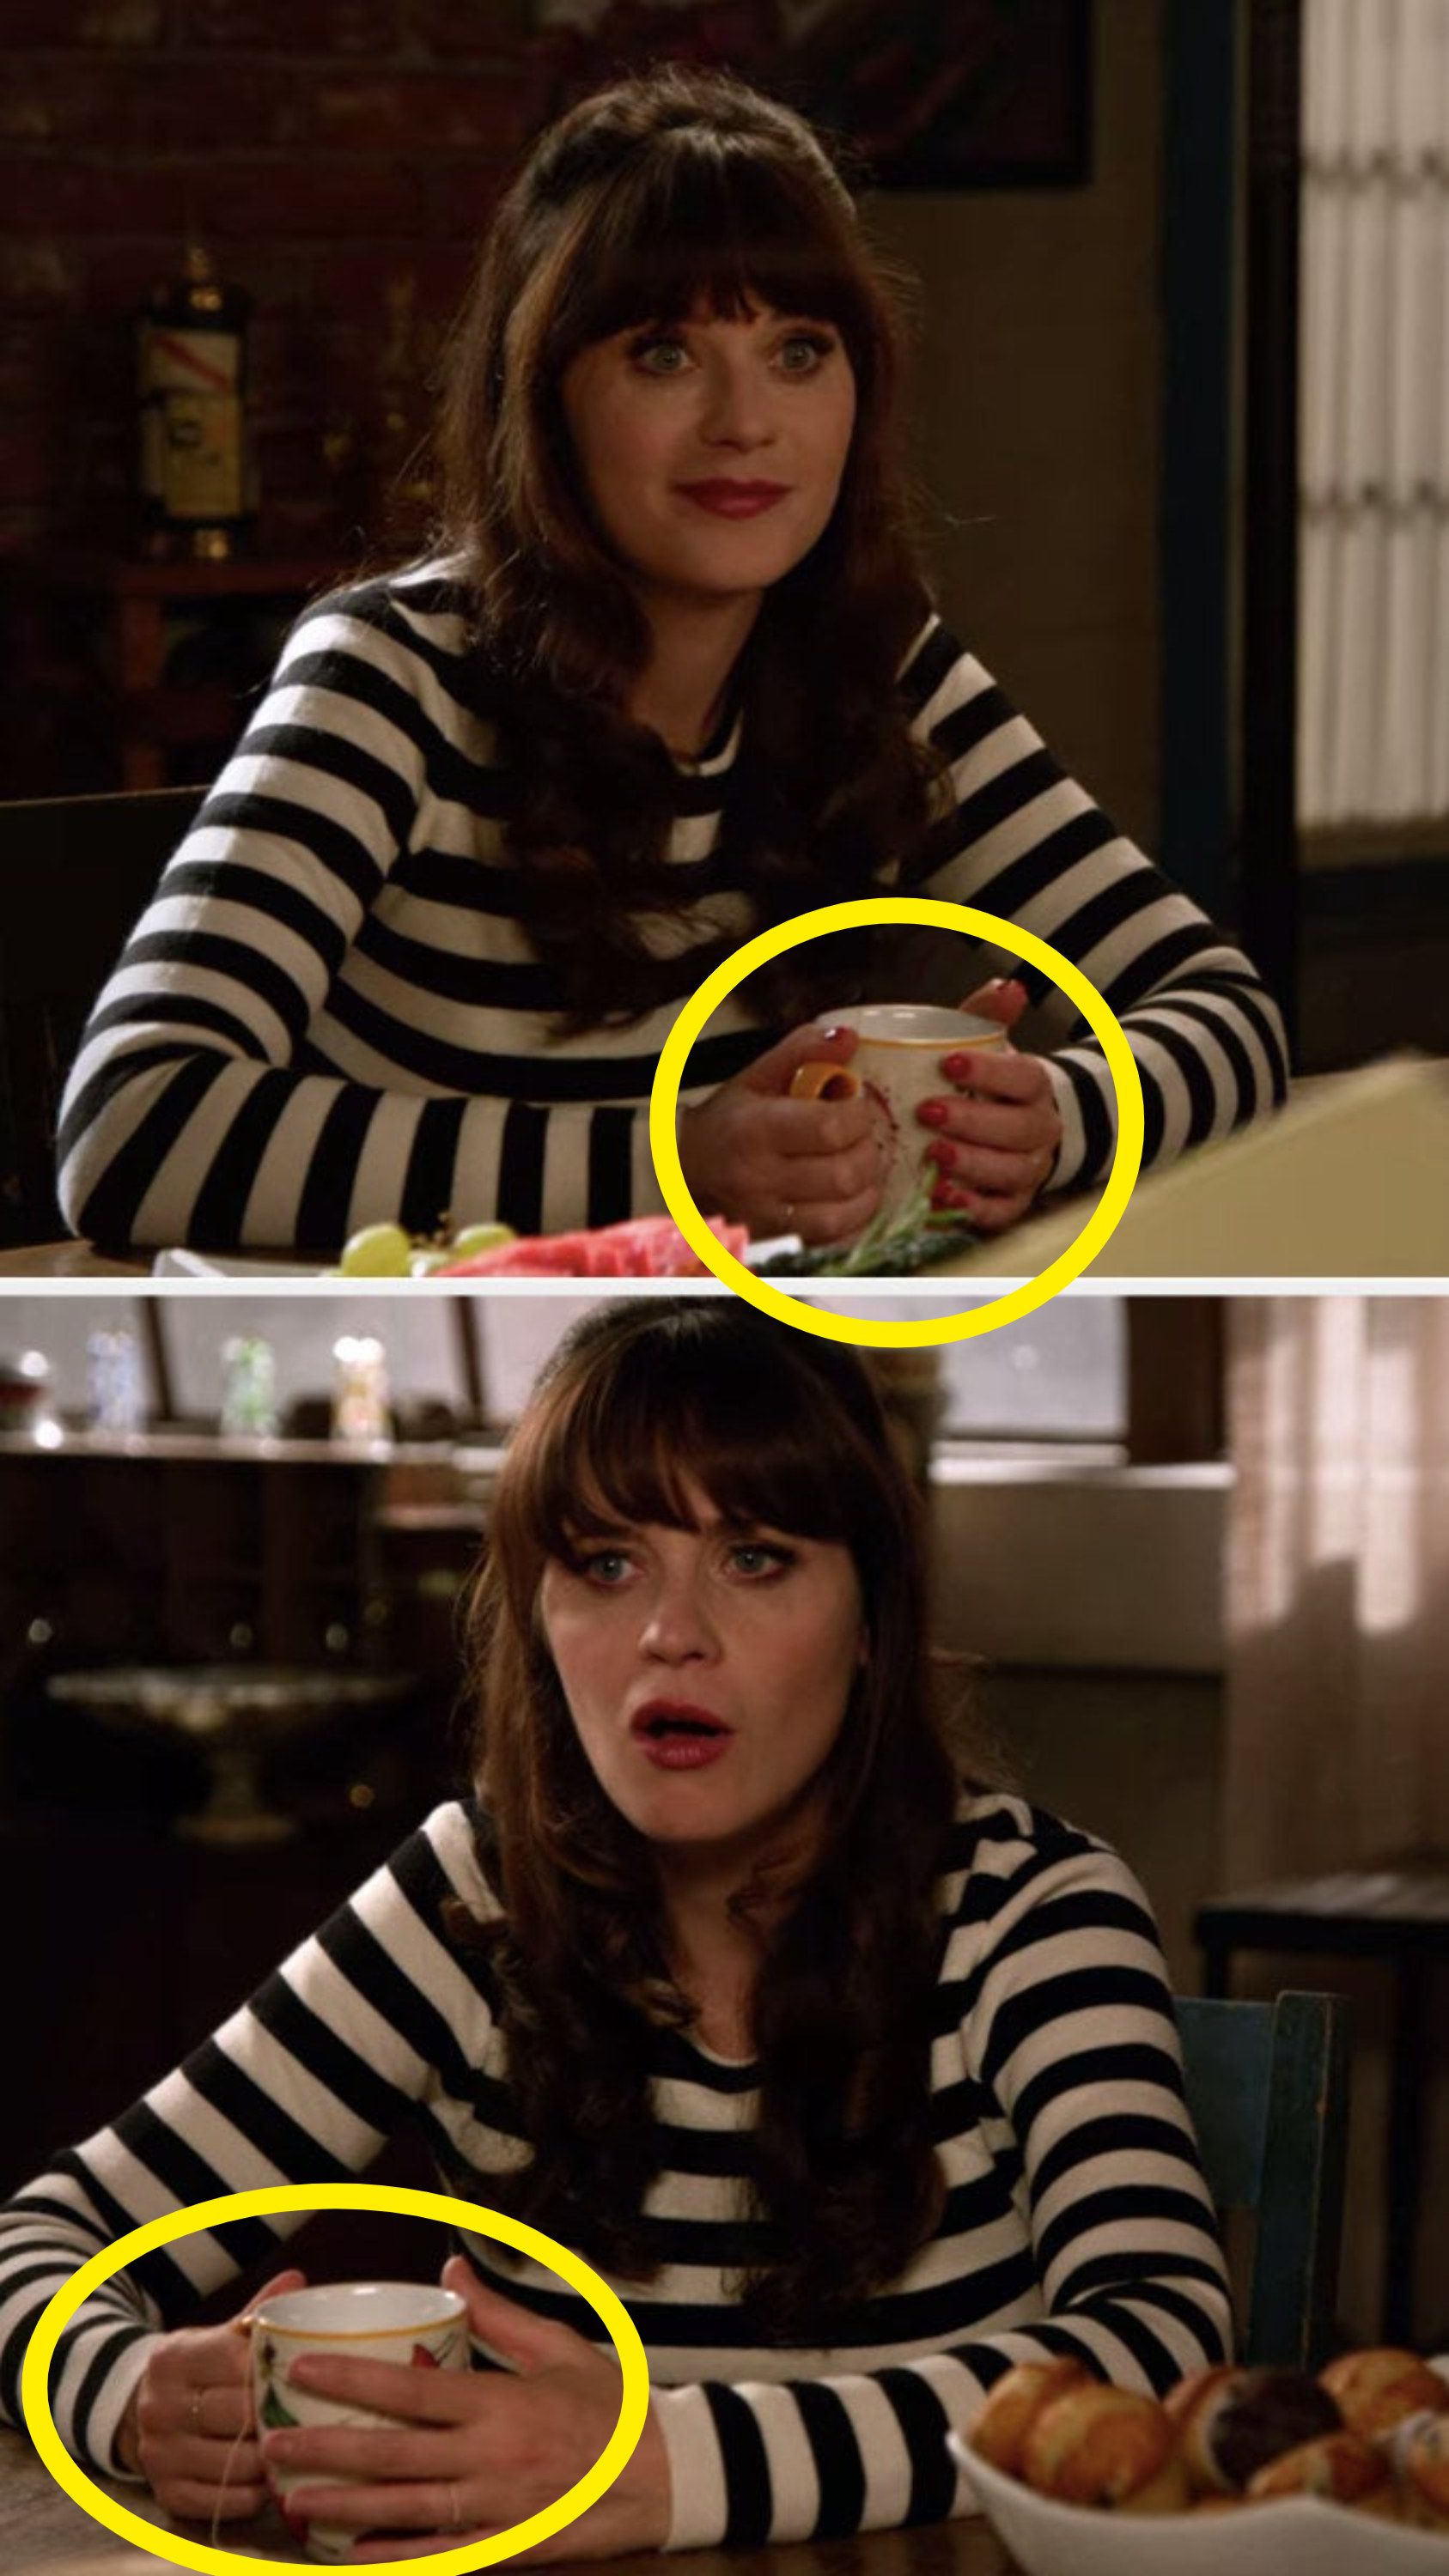 In an episode of New Girl, where Jess tries to help Nick and Schmidt, she has red nail polish in her hand while she has no nail polish on the other second.